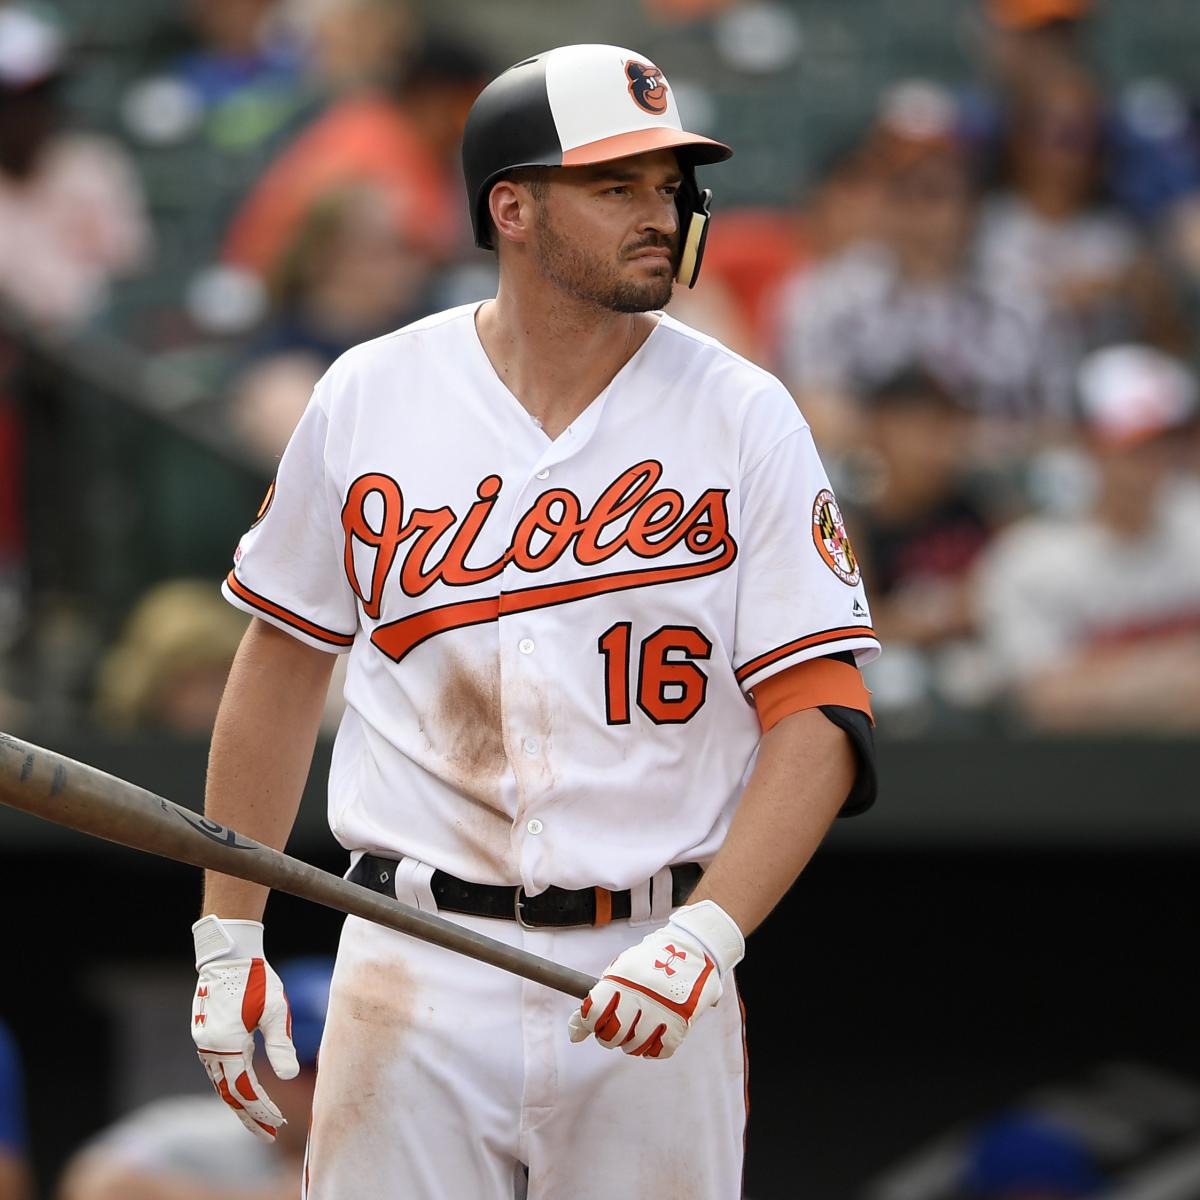 Orioles Surprise Trey Mancini on Zoom Call After Colon Cancer Diagnosis ...